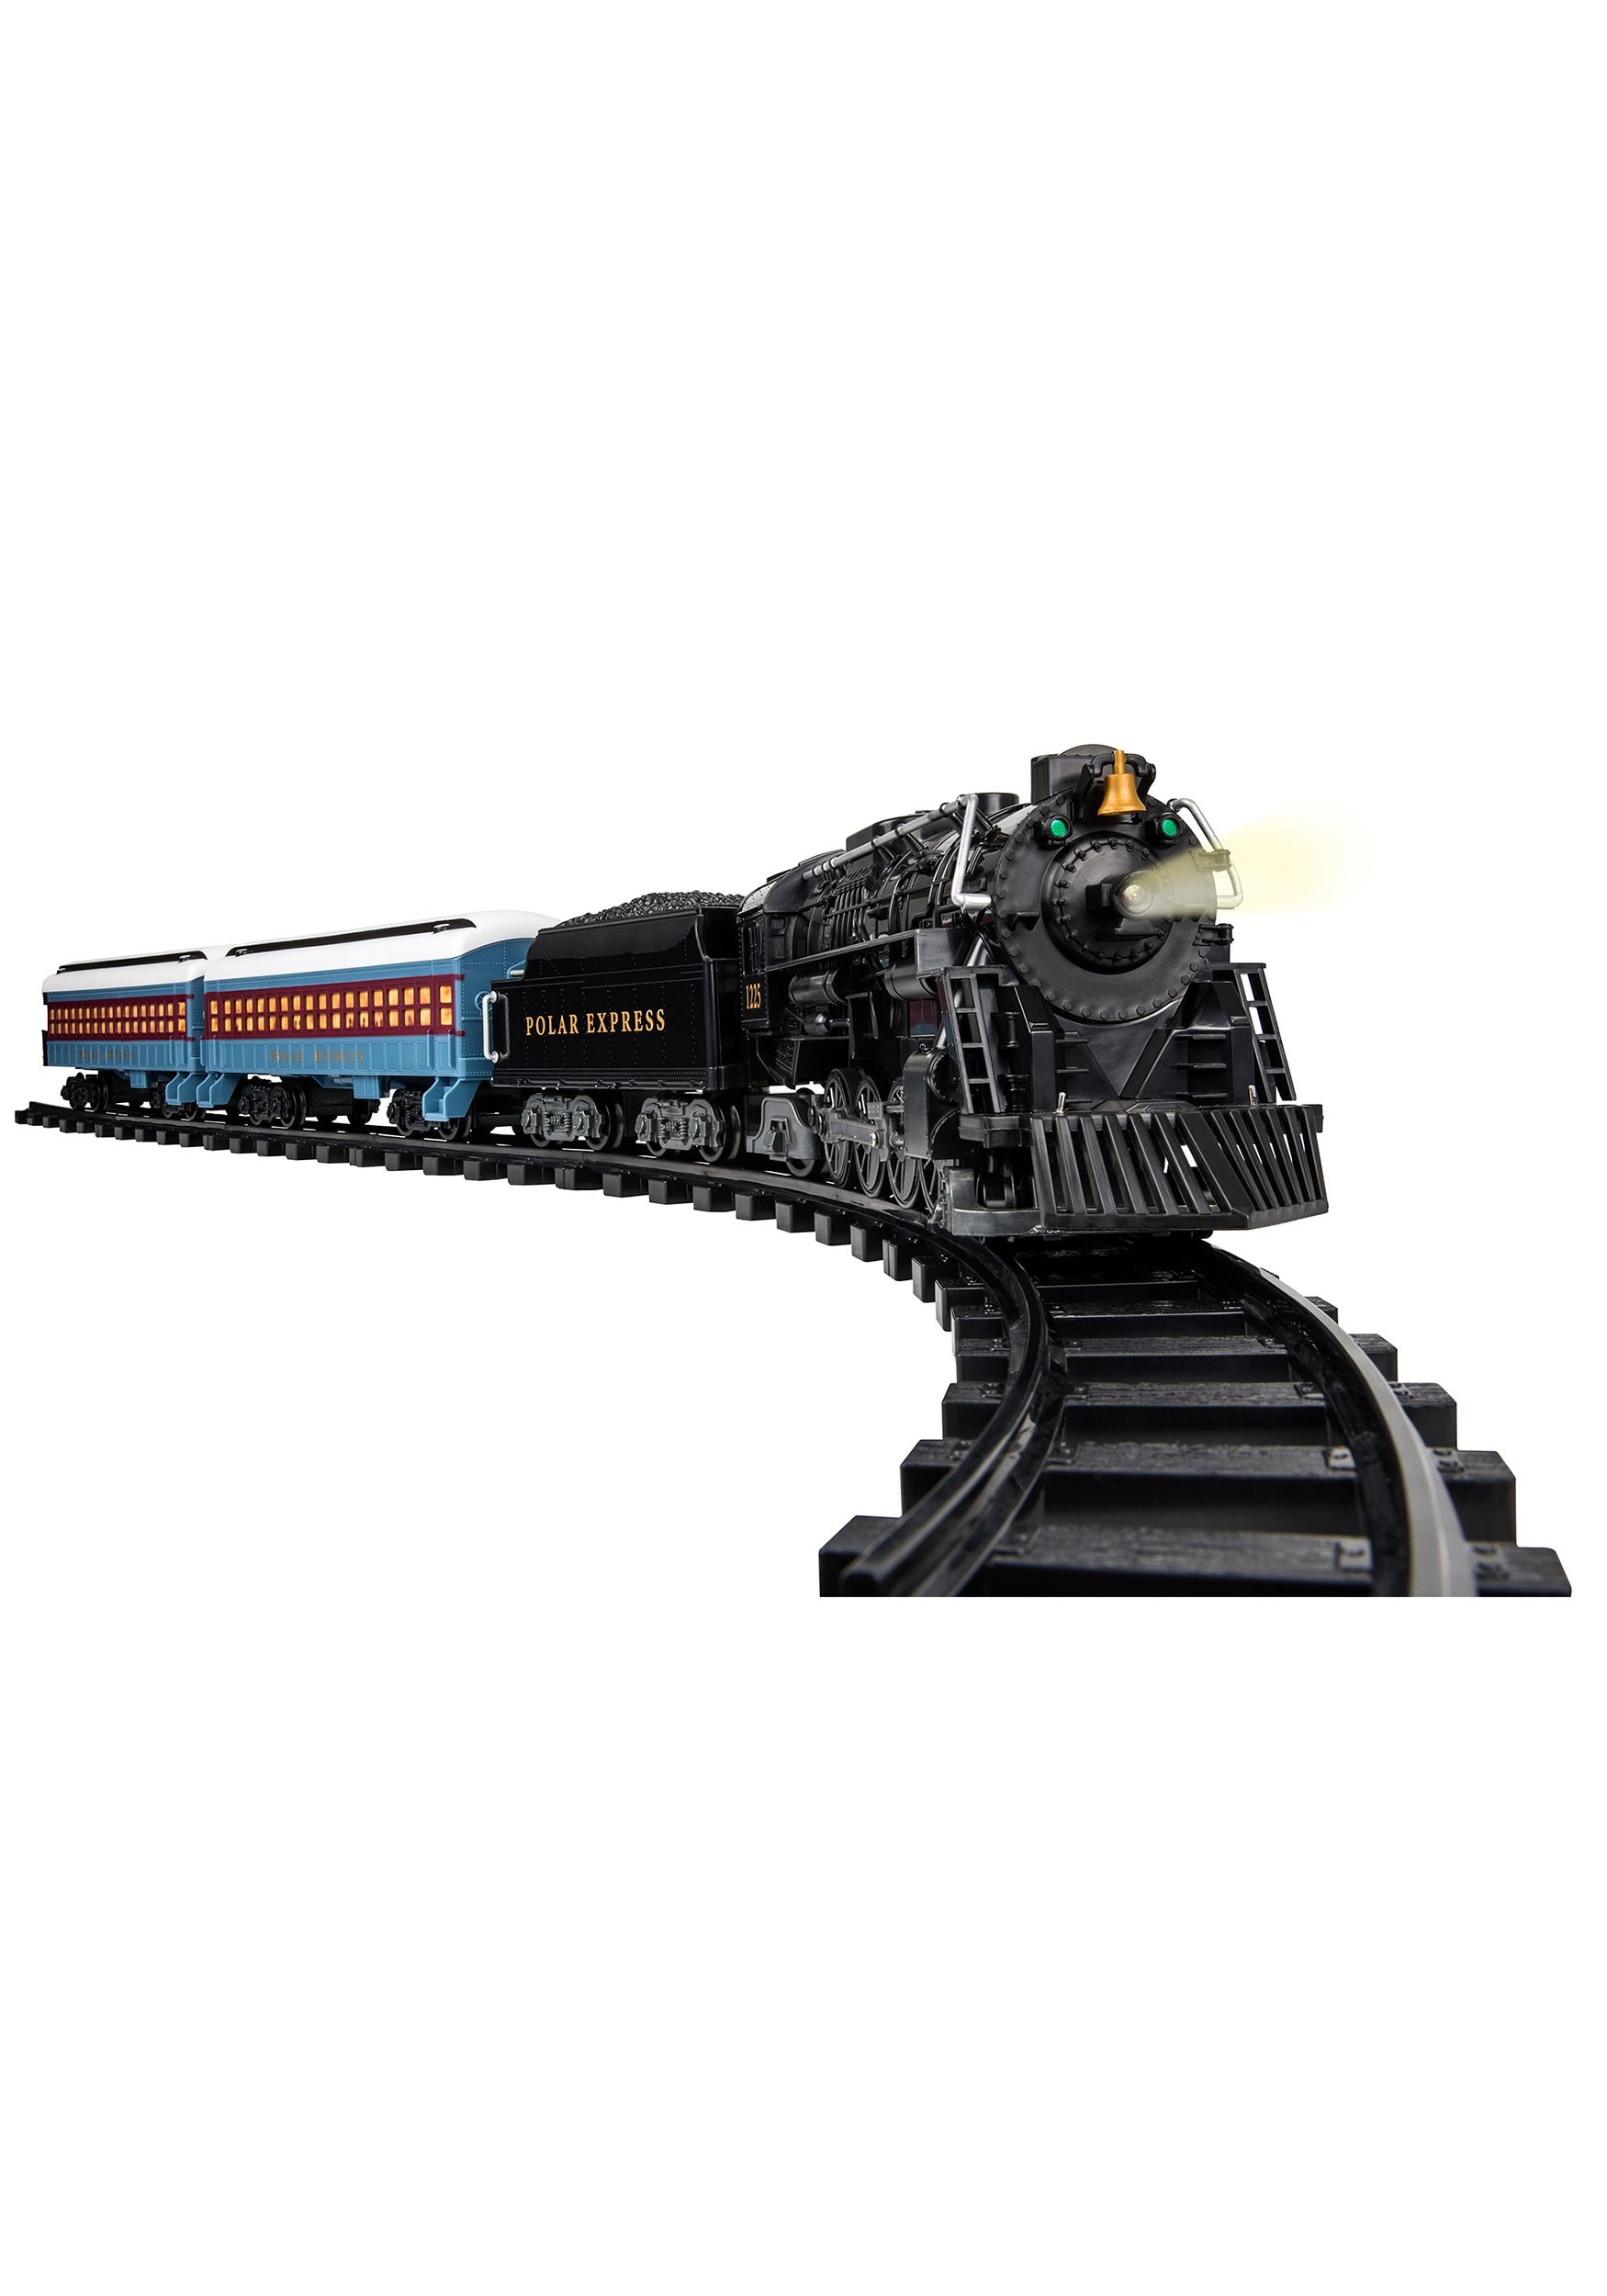 The Polar Express Ready-to-Play Lionel Train Set